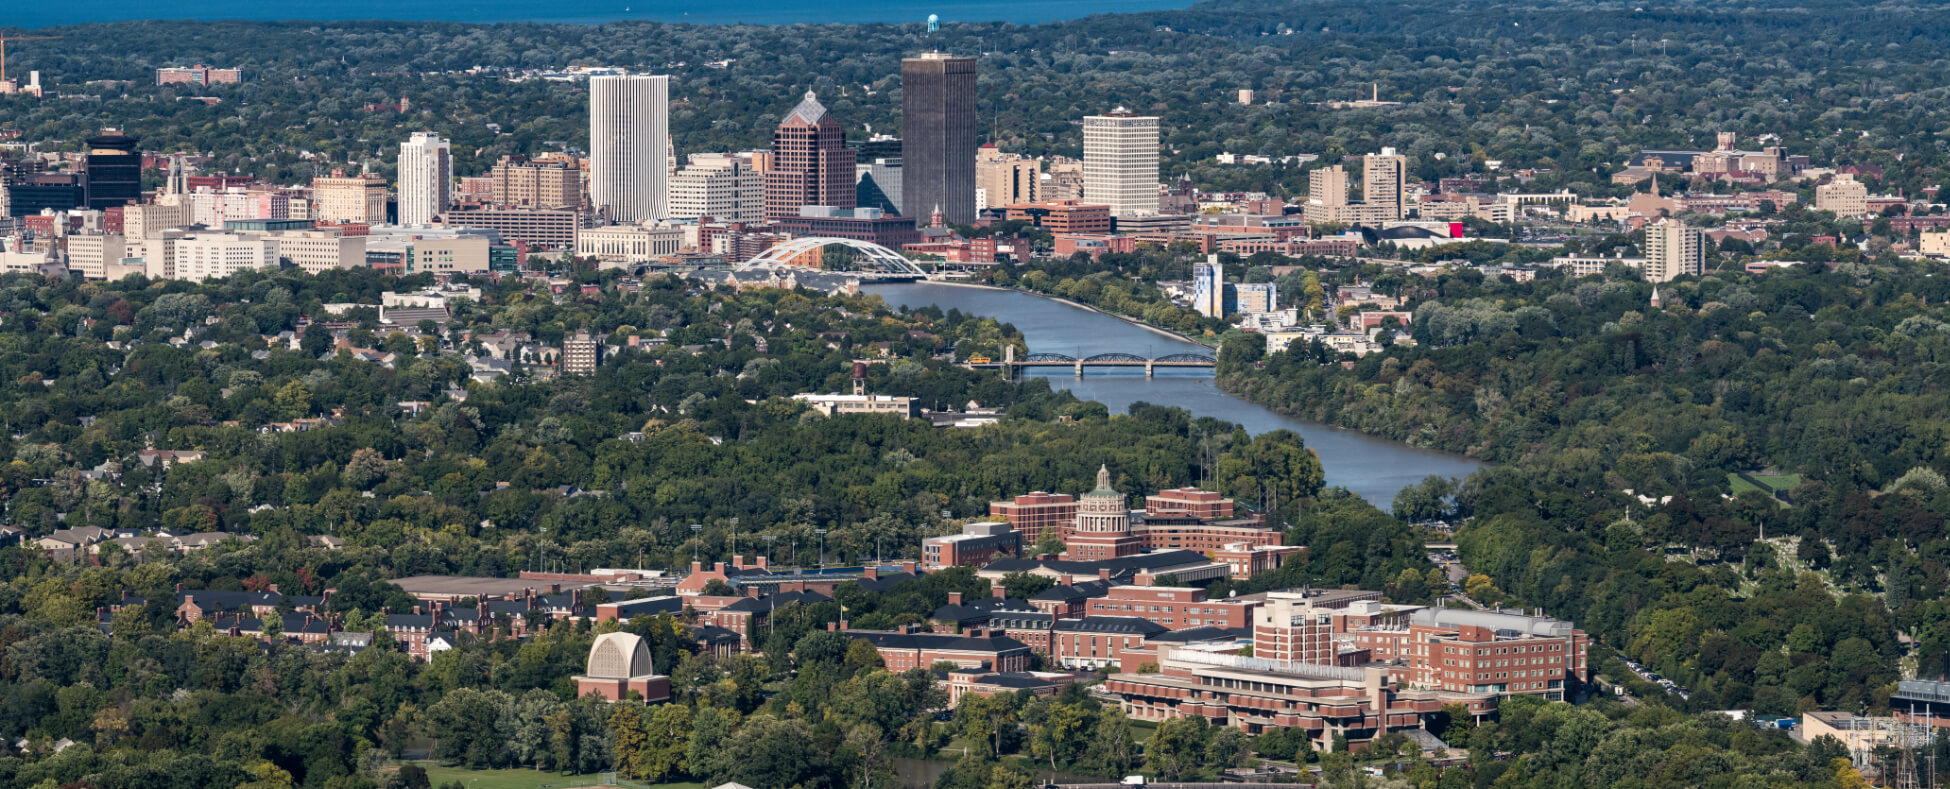 Aerial image of University of Rochester with city of Rochester in background